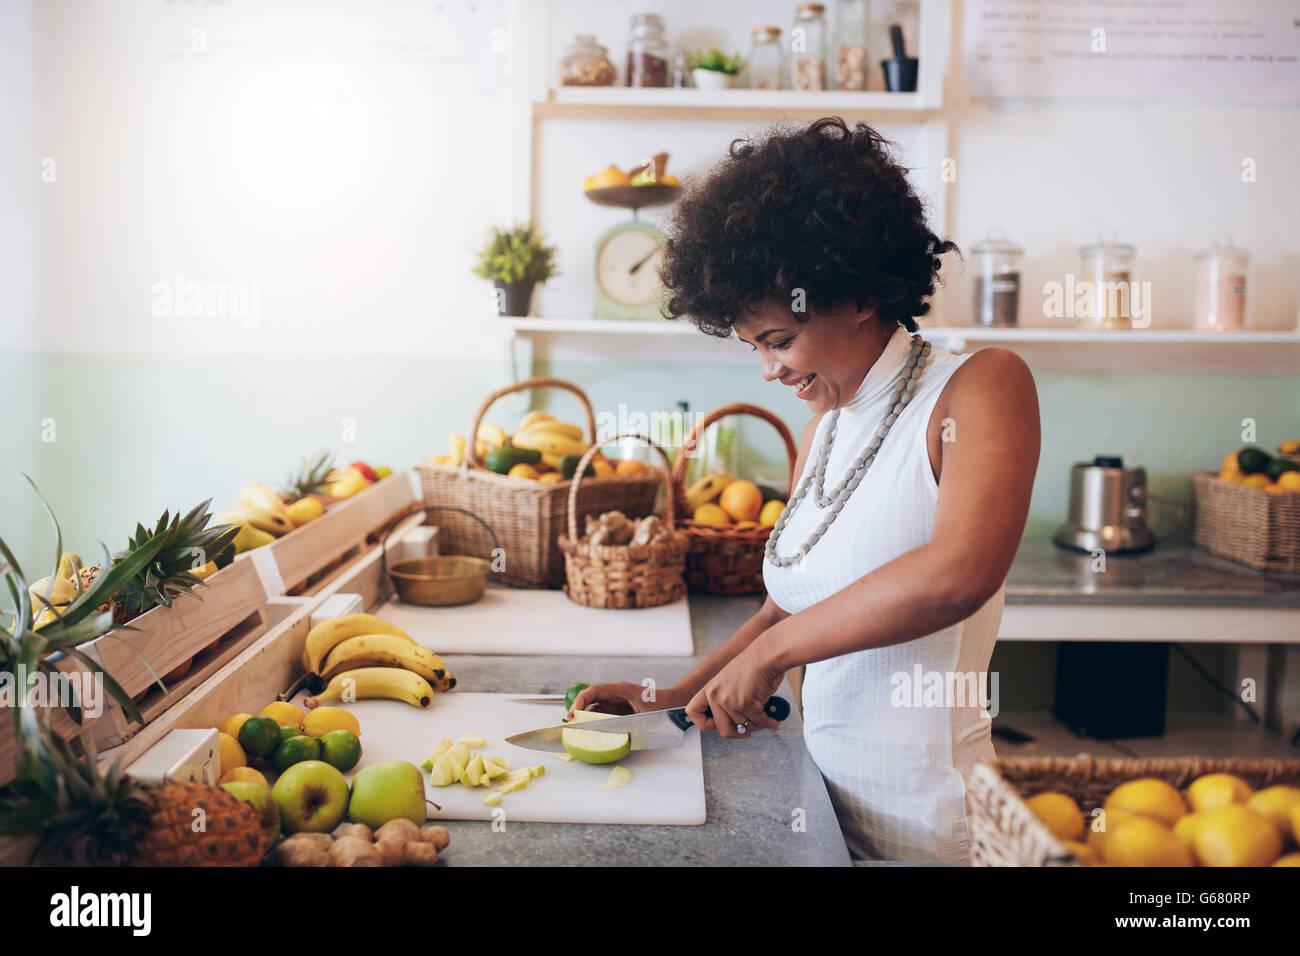 Shot of young african woman working at juice bar and cutting fruits. Female bartender making fresh juice. Stock Photo